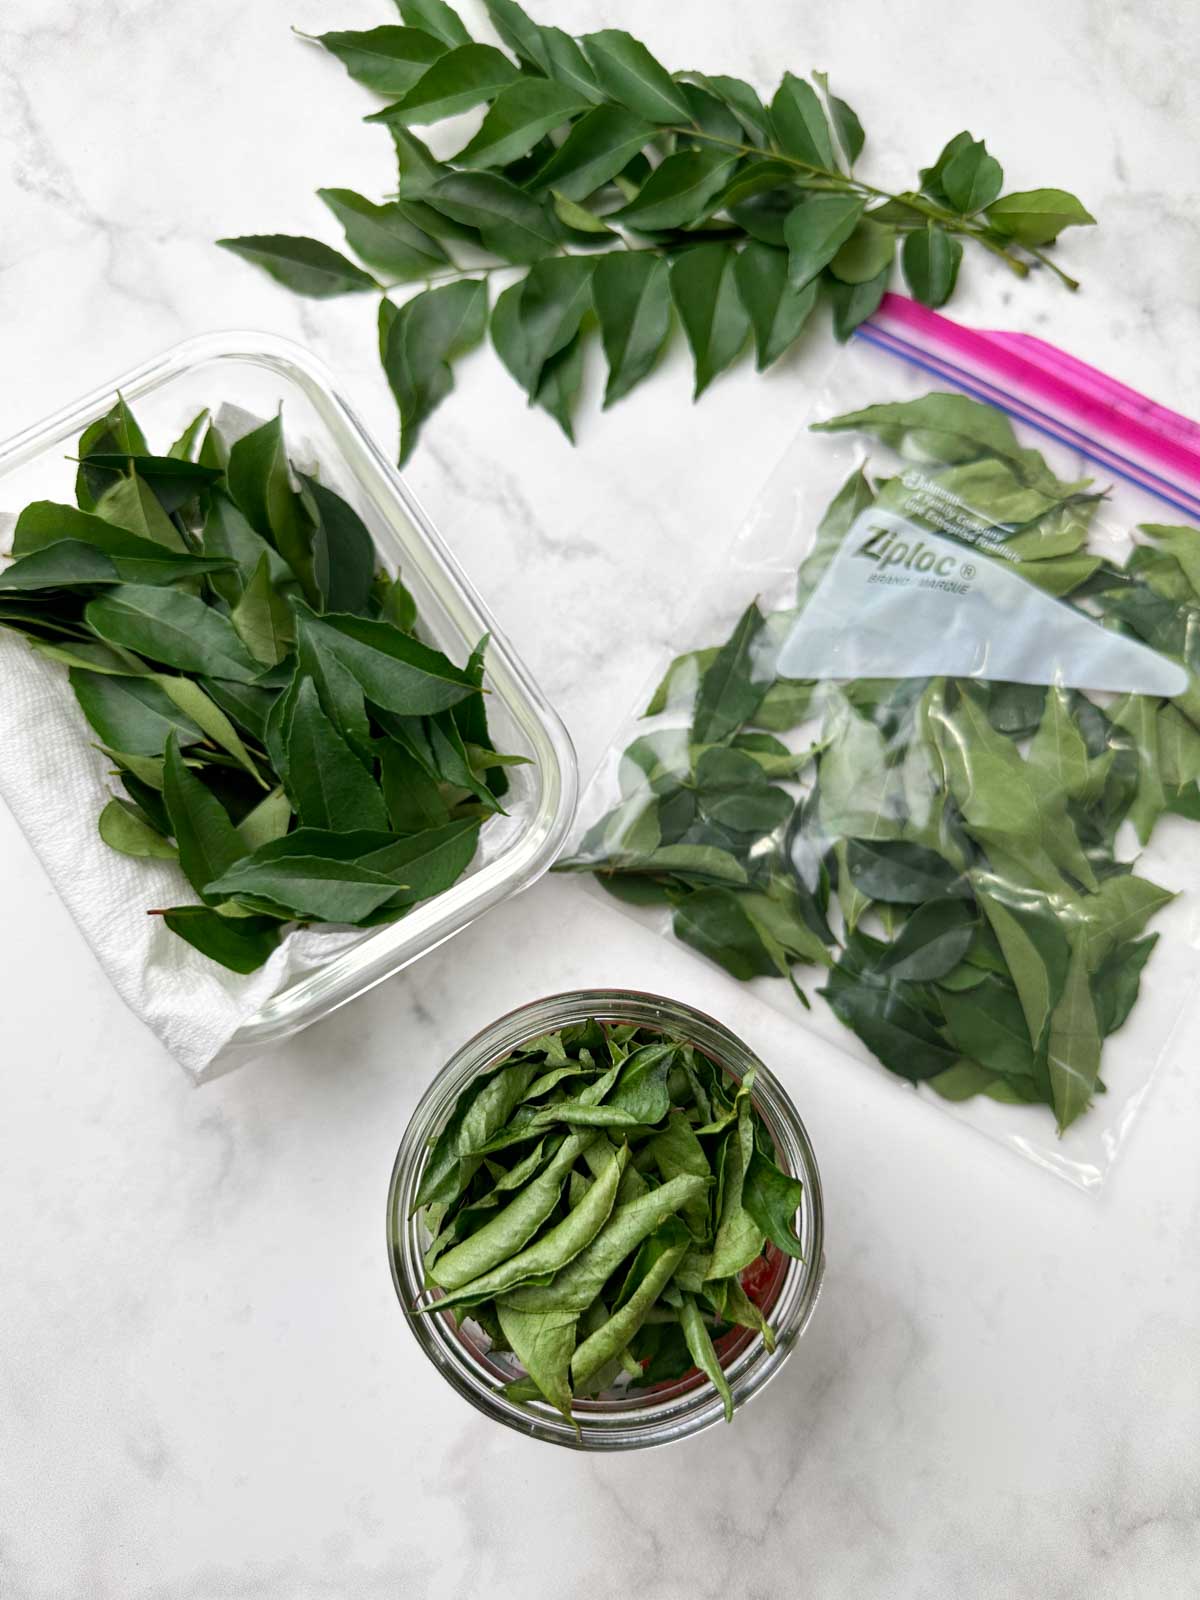 storing curry leaves in a container, ziplock bag and dried curry leaves in a glass container